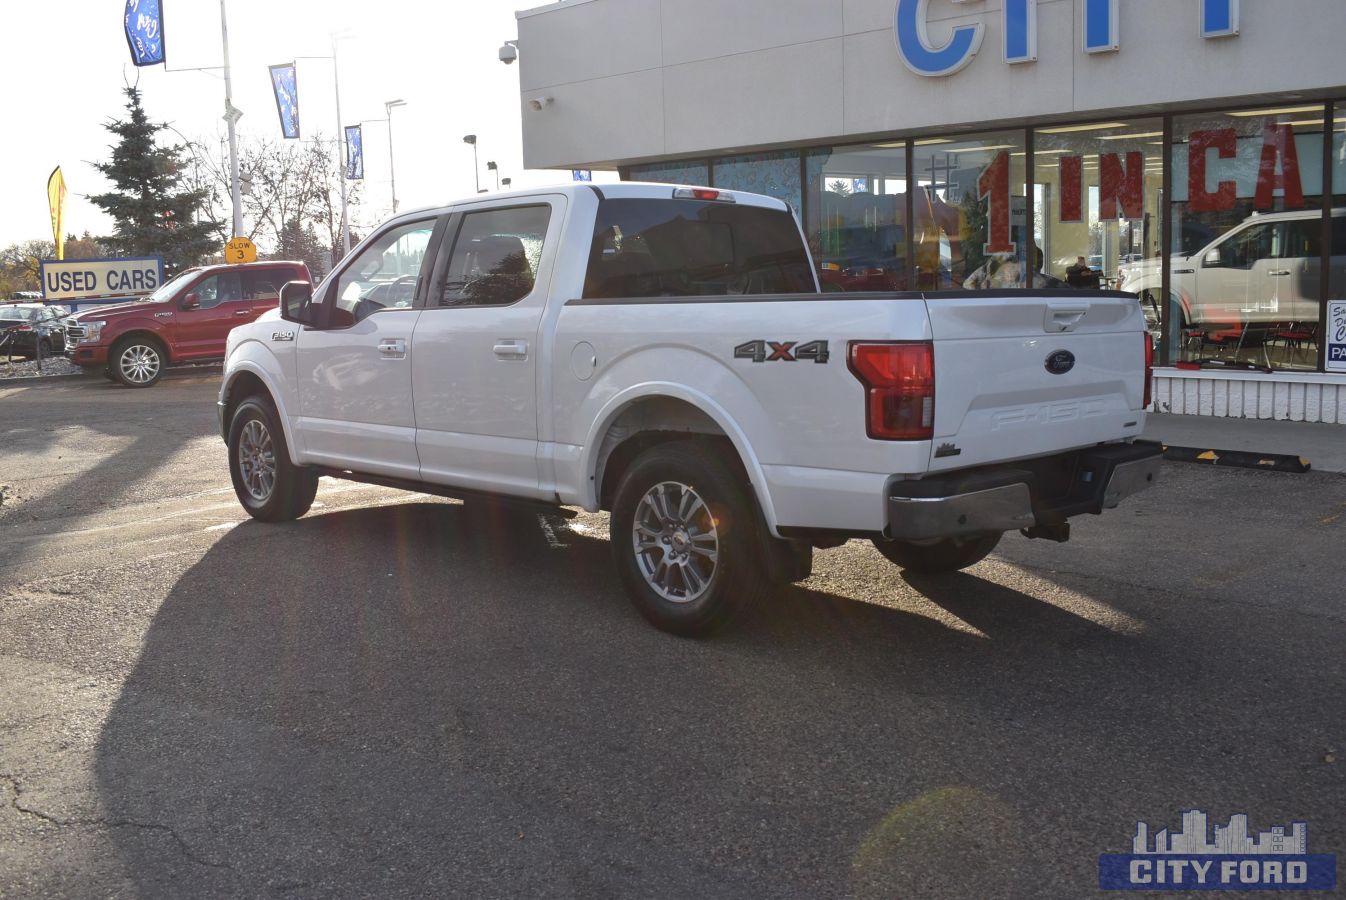 2018 Ford F-150 for sale in Edmonton, AB (1705280117) - The Car Guide 2018 Ford F 150 2.7 Ecoboost Gas Tank Size